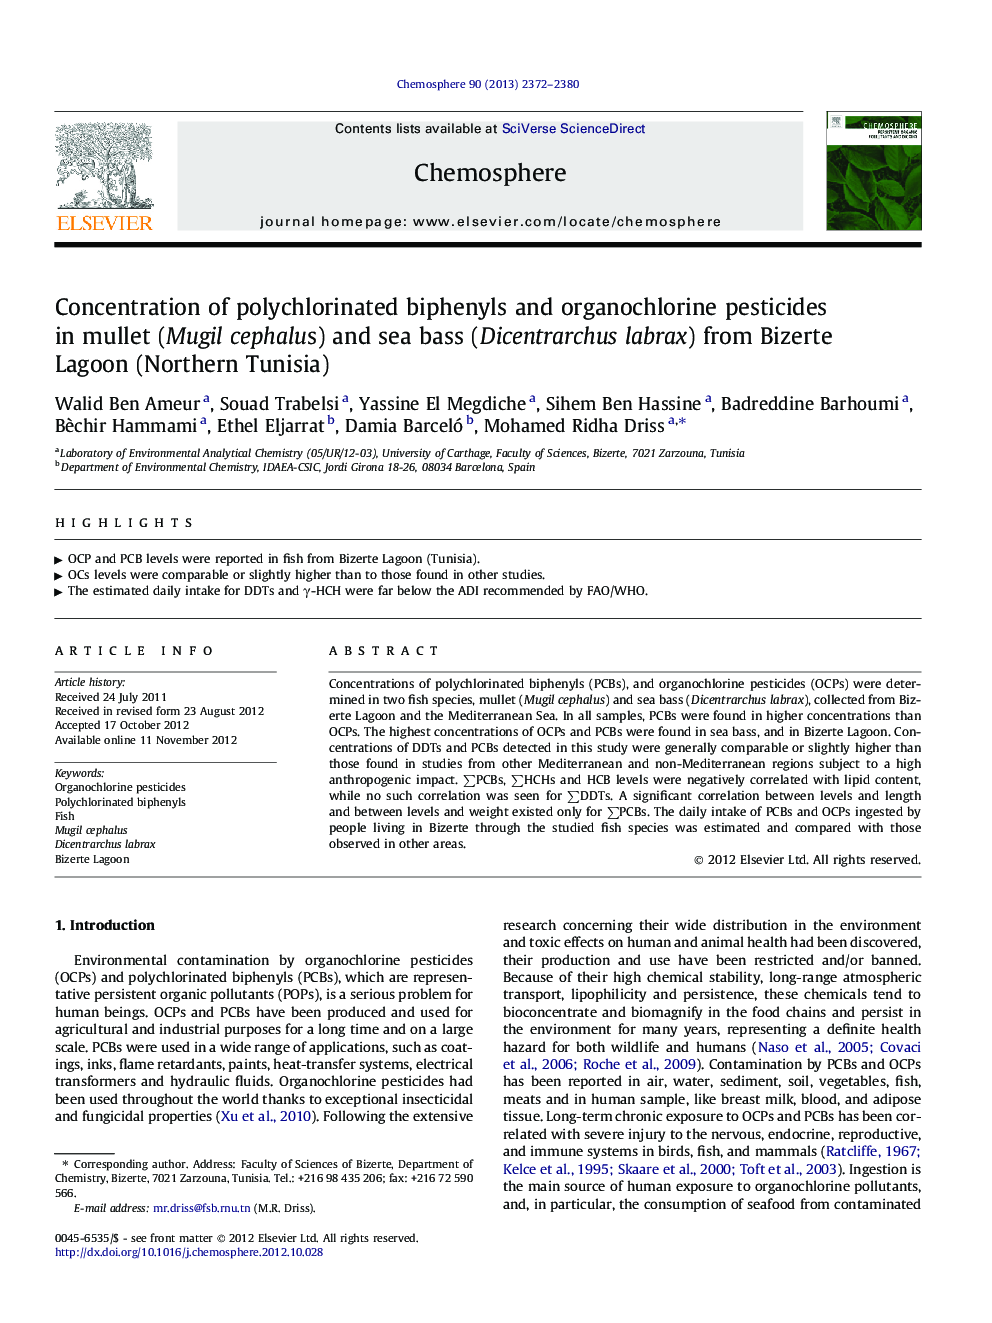 Concentration of polychlorinated biphenyls and organochlorine pesticides in mullet (Mugil cephalus) and sea bass (Dicentrarchus labrax) from Bizerte Lagoon (Northern Tunisia)